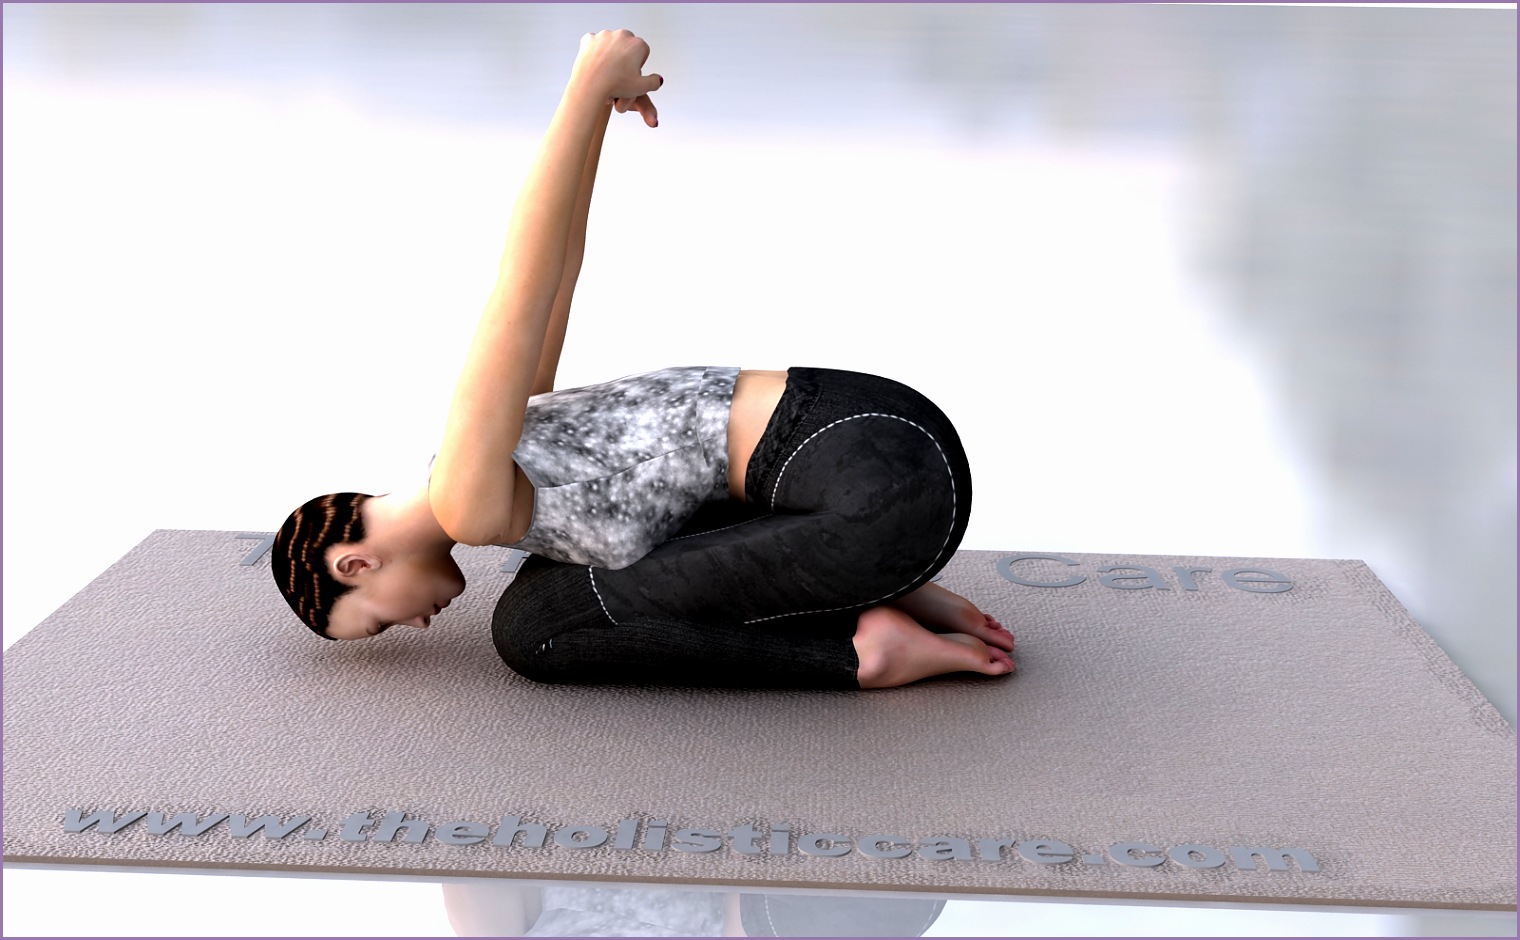 yoga mudra pose pictures Archives - Work Out Picture Media - Work Out